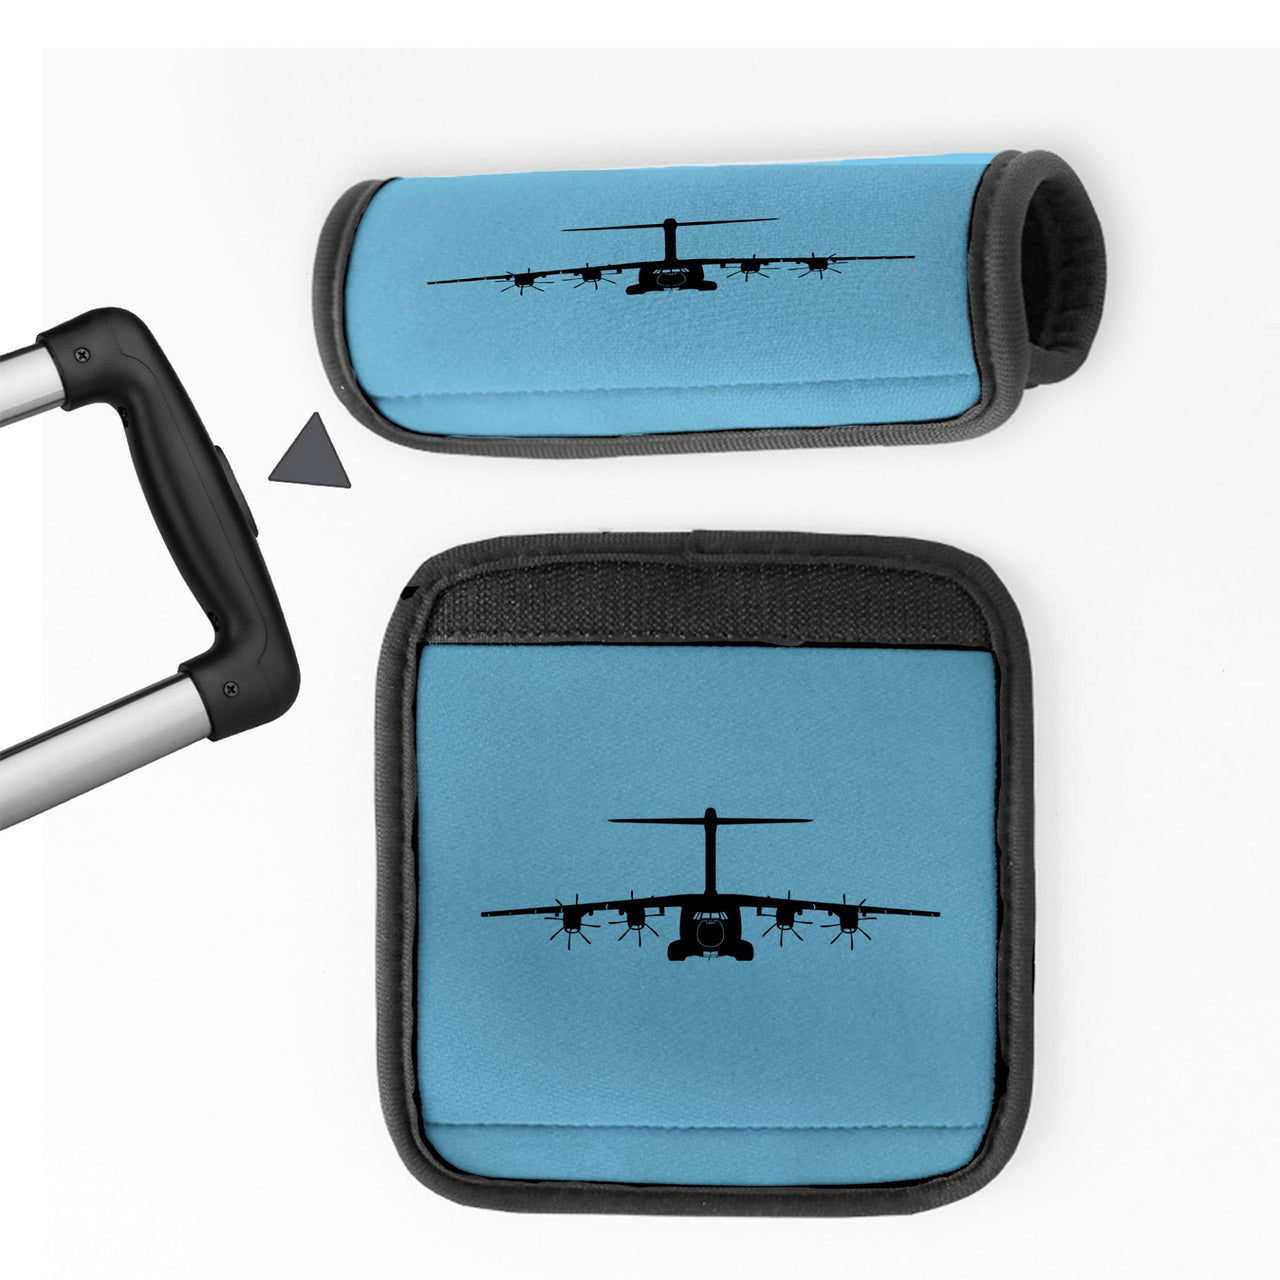 Airbus A400M Silhouette Designed Neoprene Luggage Handle Covers